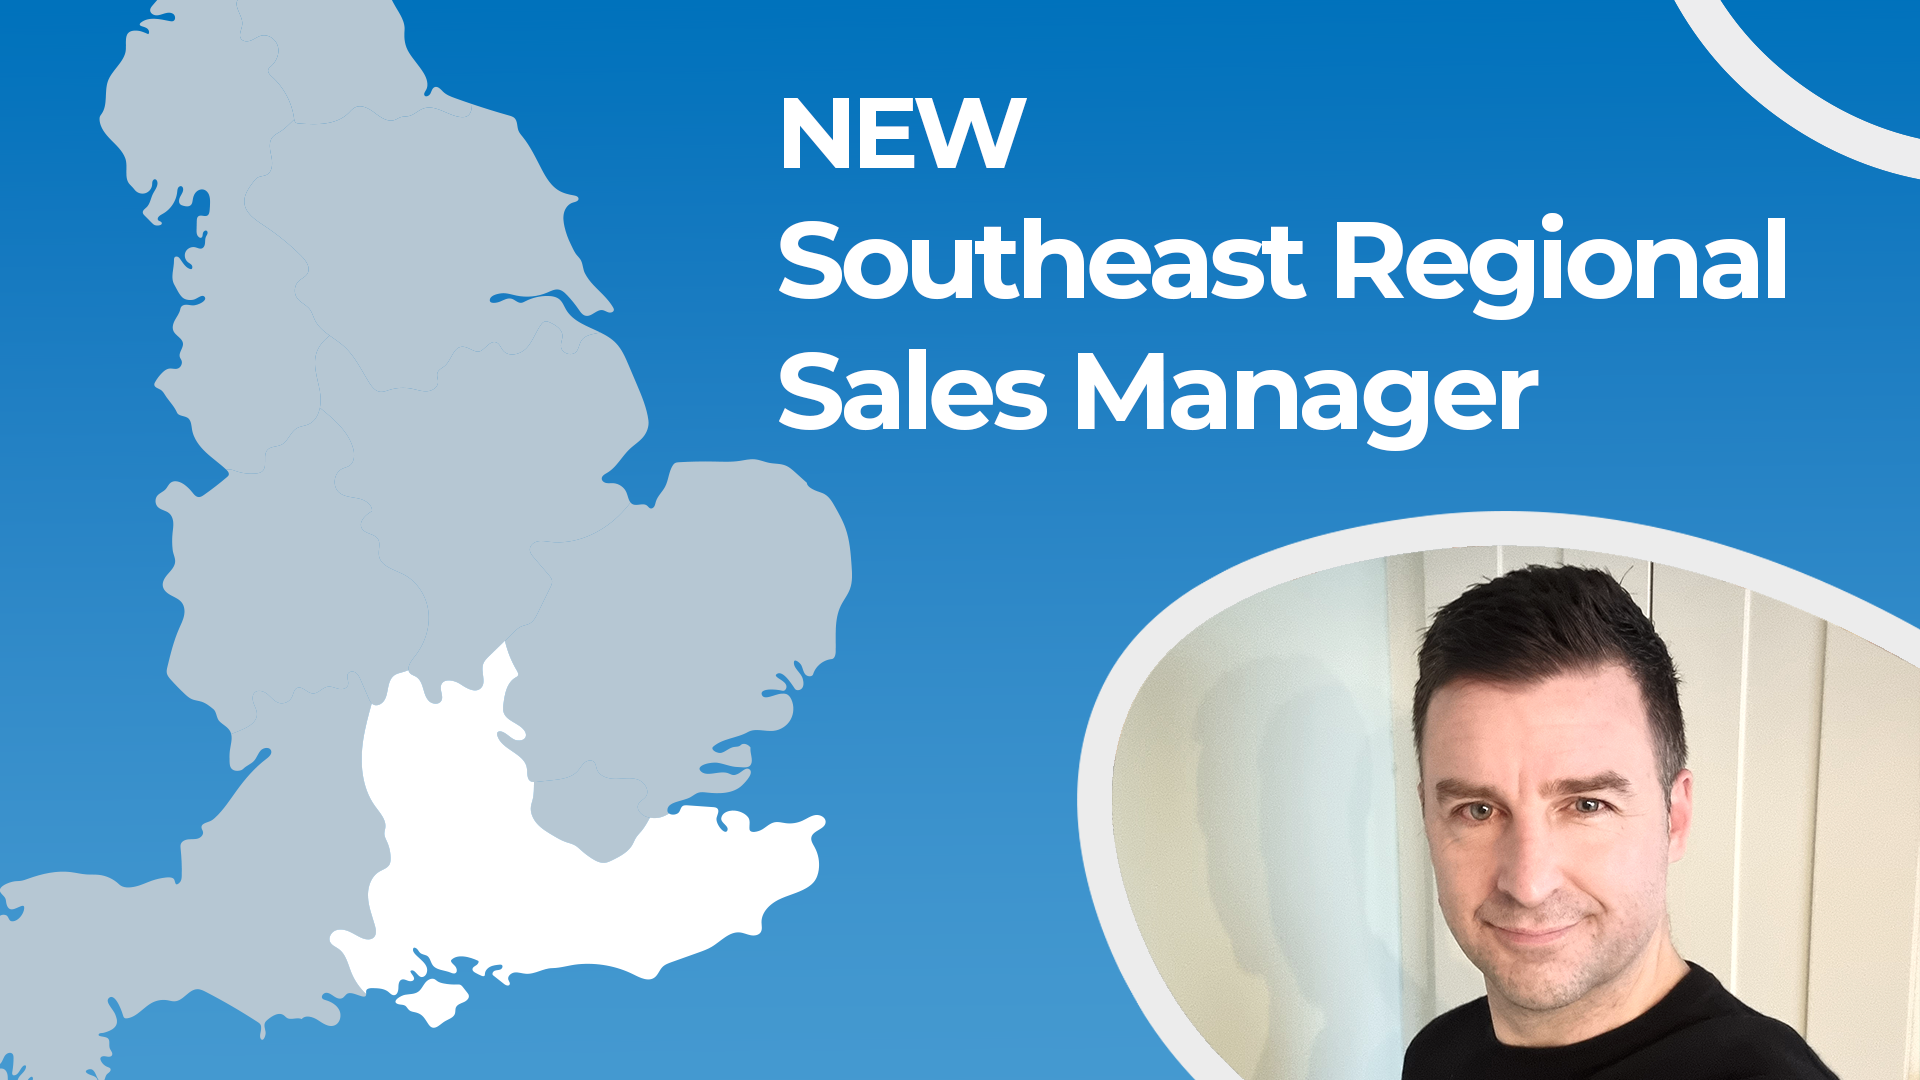 Meet Lee: The New Regional Sales Manager for the Southeast